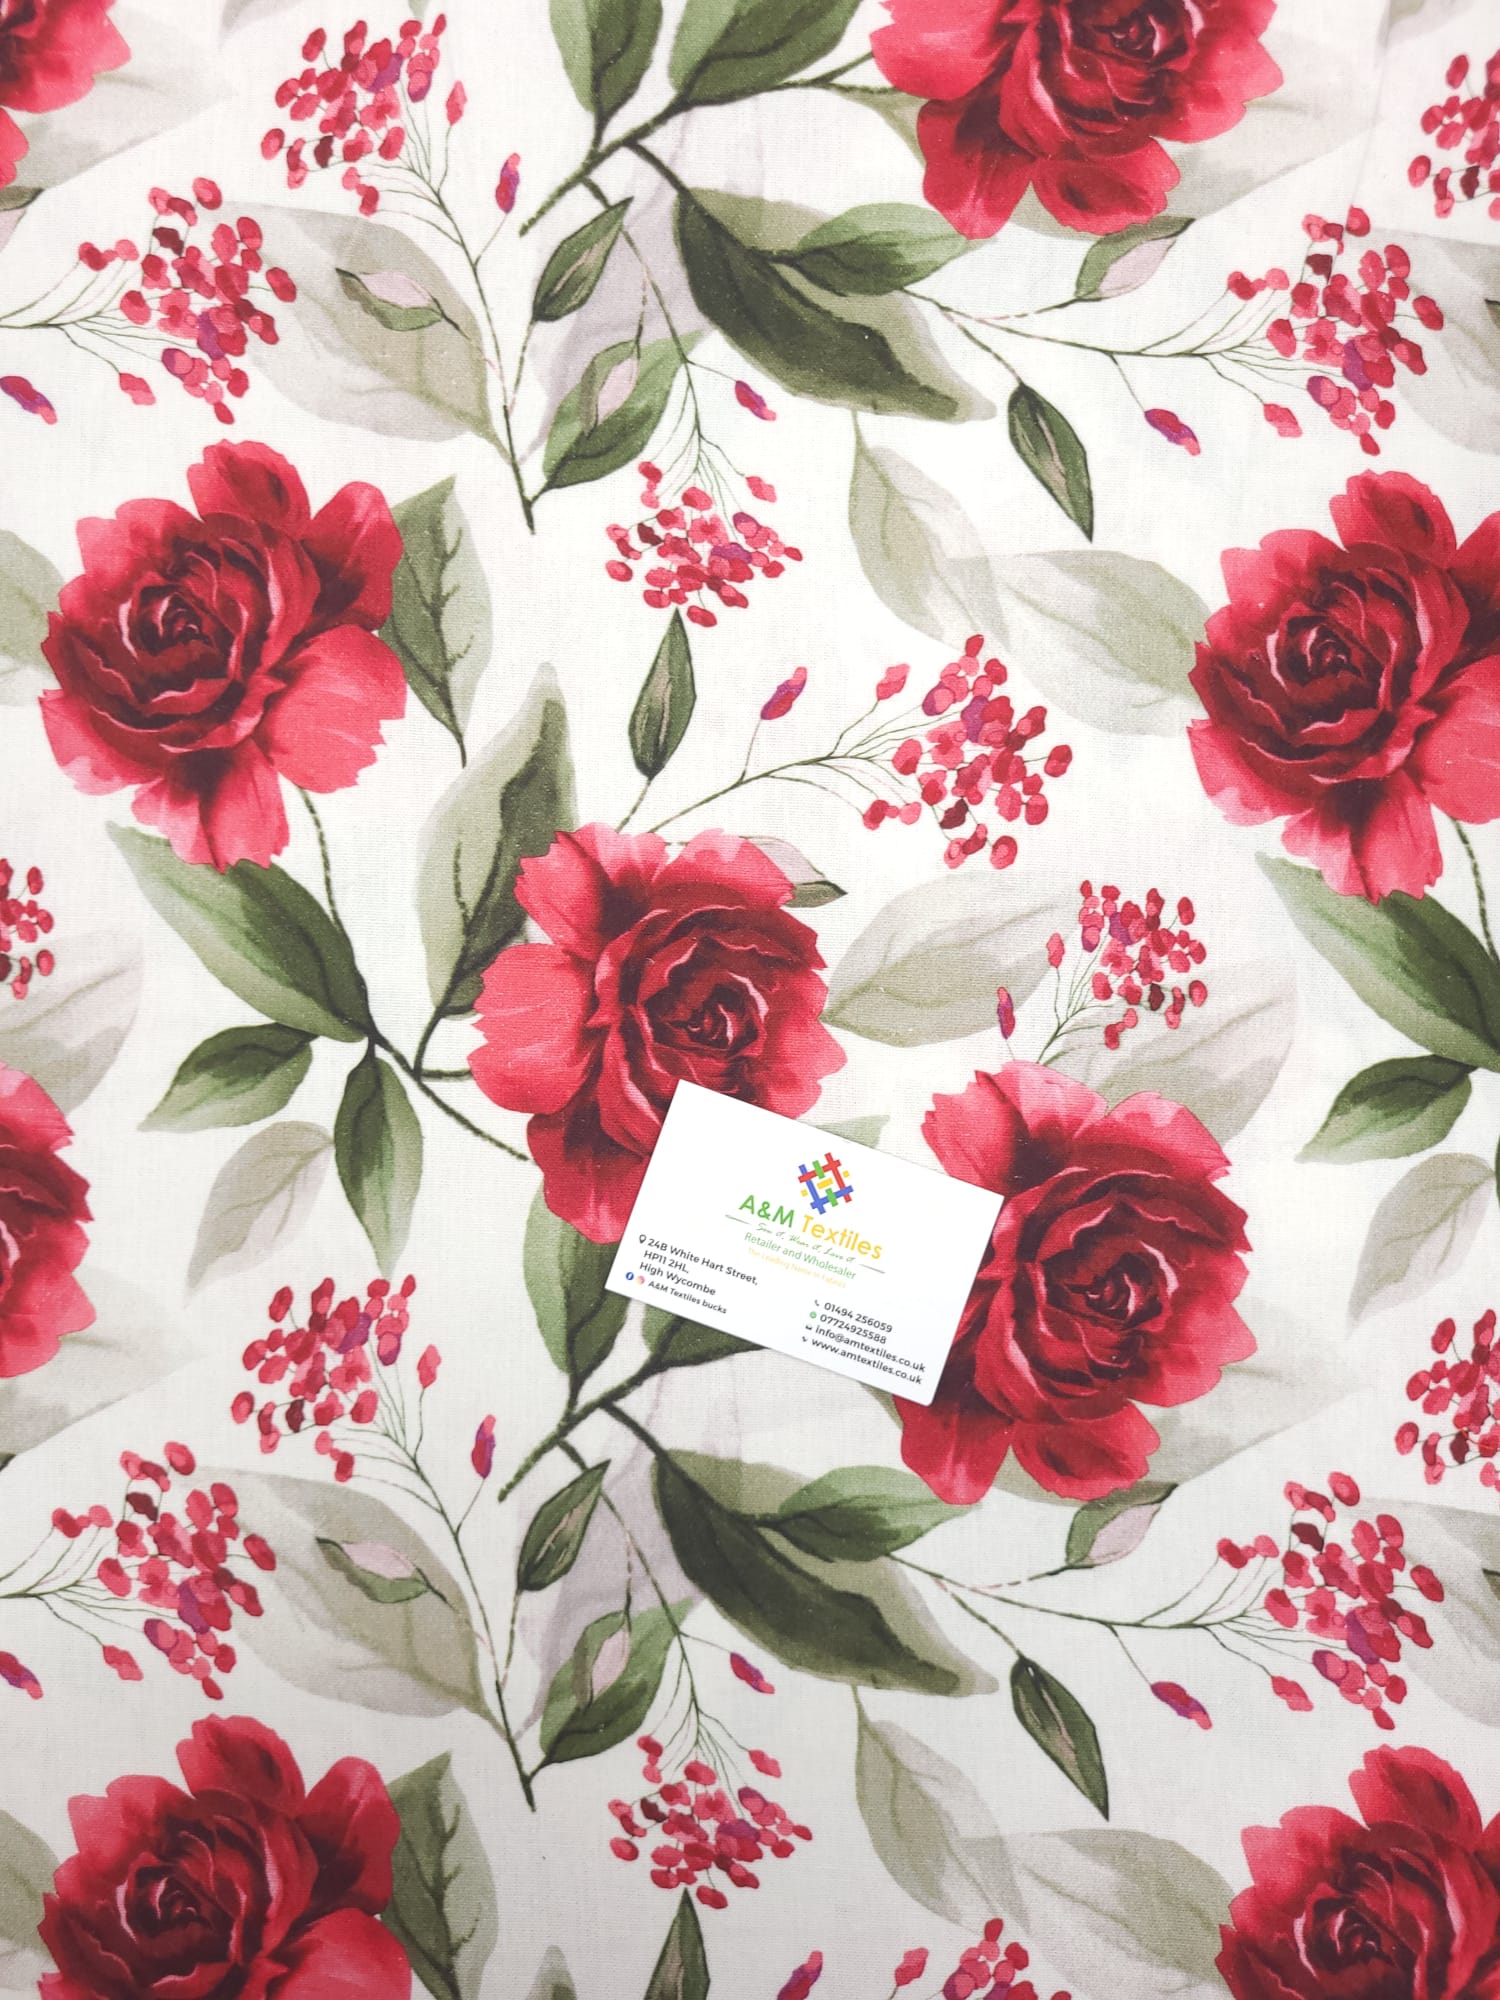 Roses on White Linen Cotton Fabric